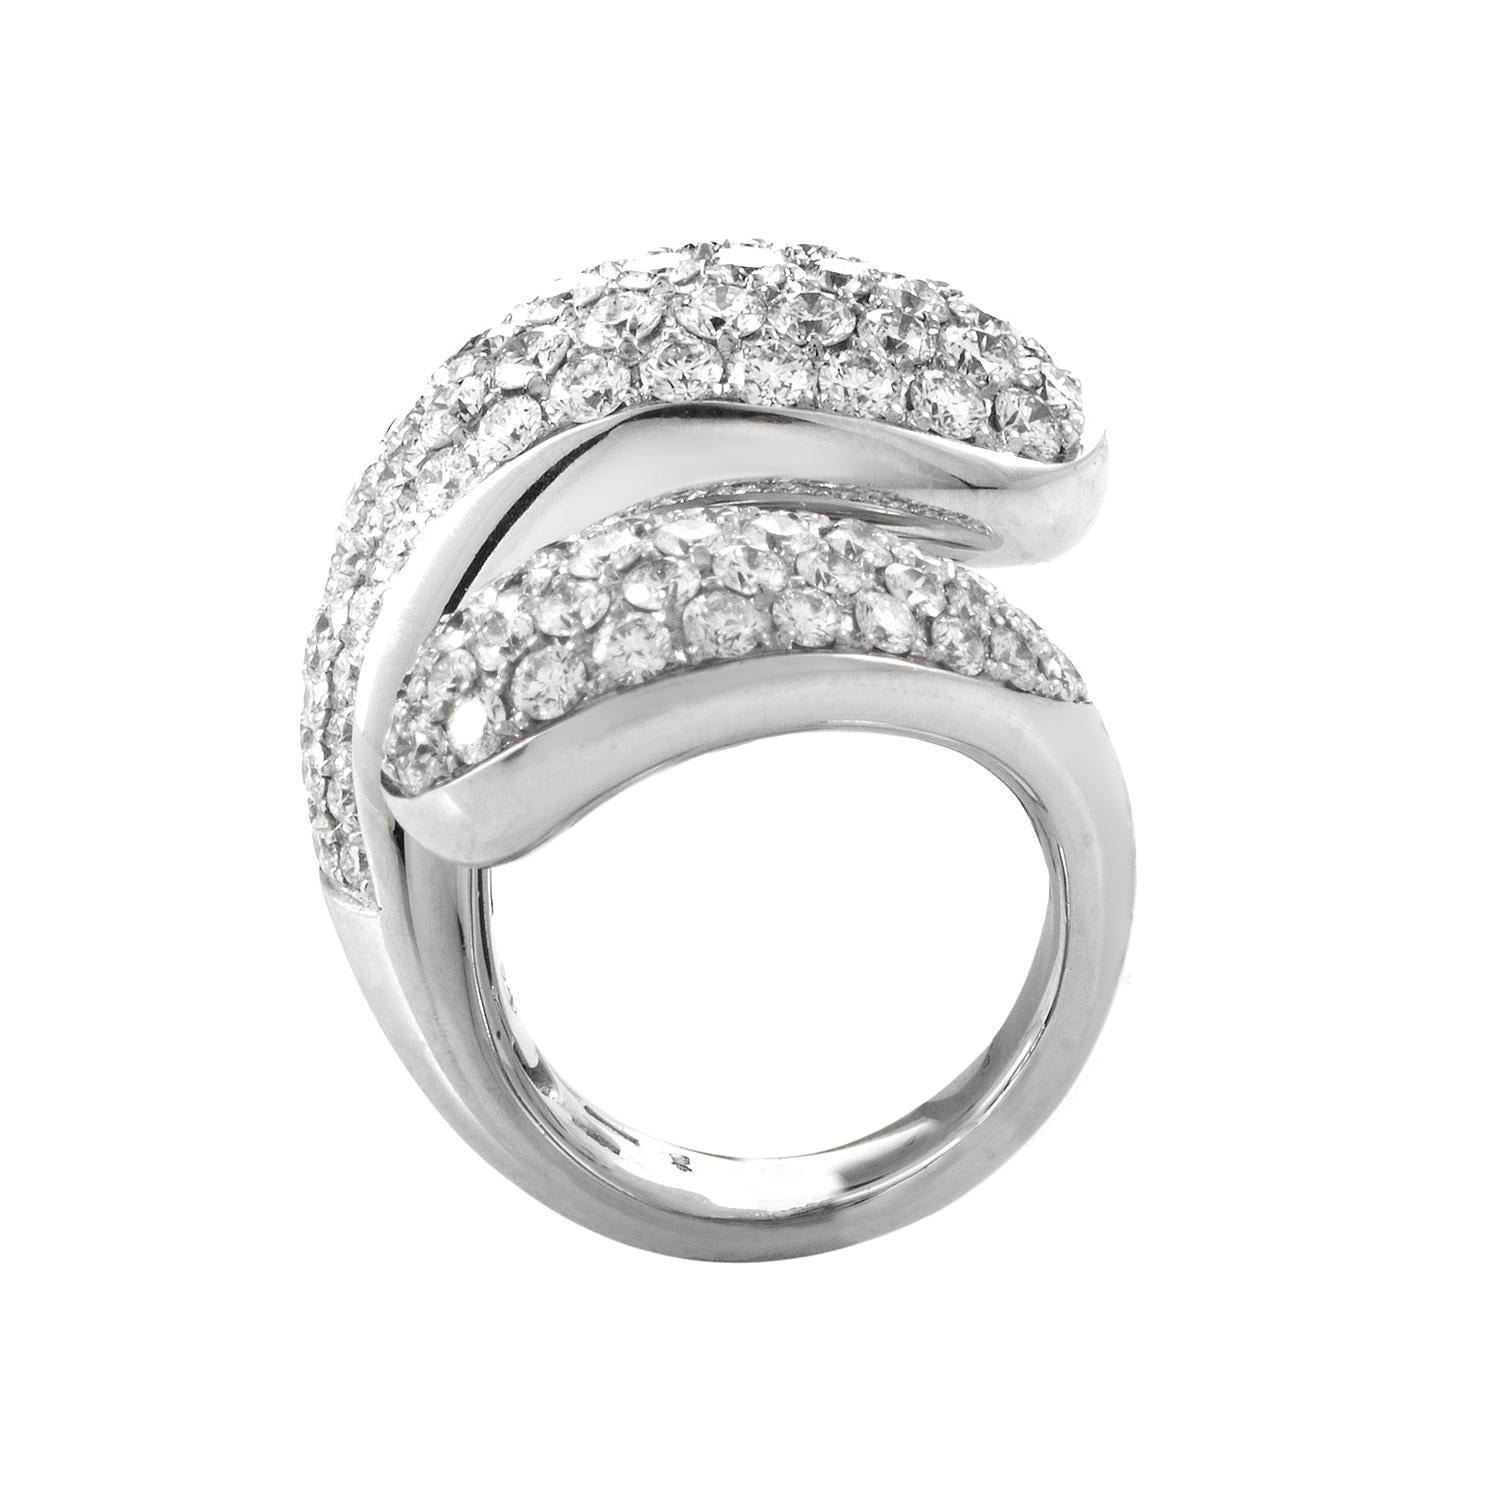 This ring from de Grisogono is lavish and lovely. It is made of 18K white gold and is set with and ~6ct diamond pave.
